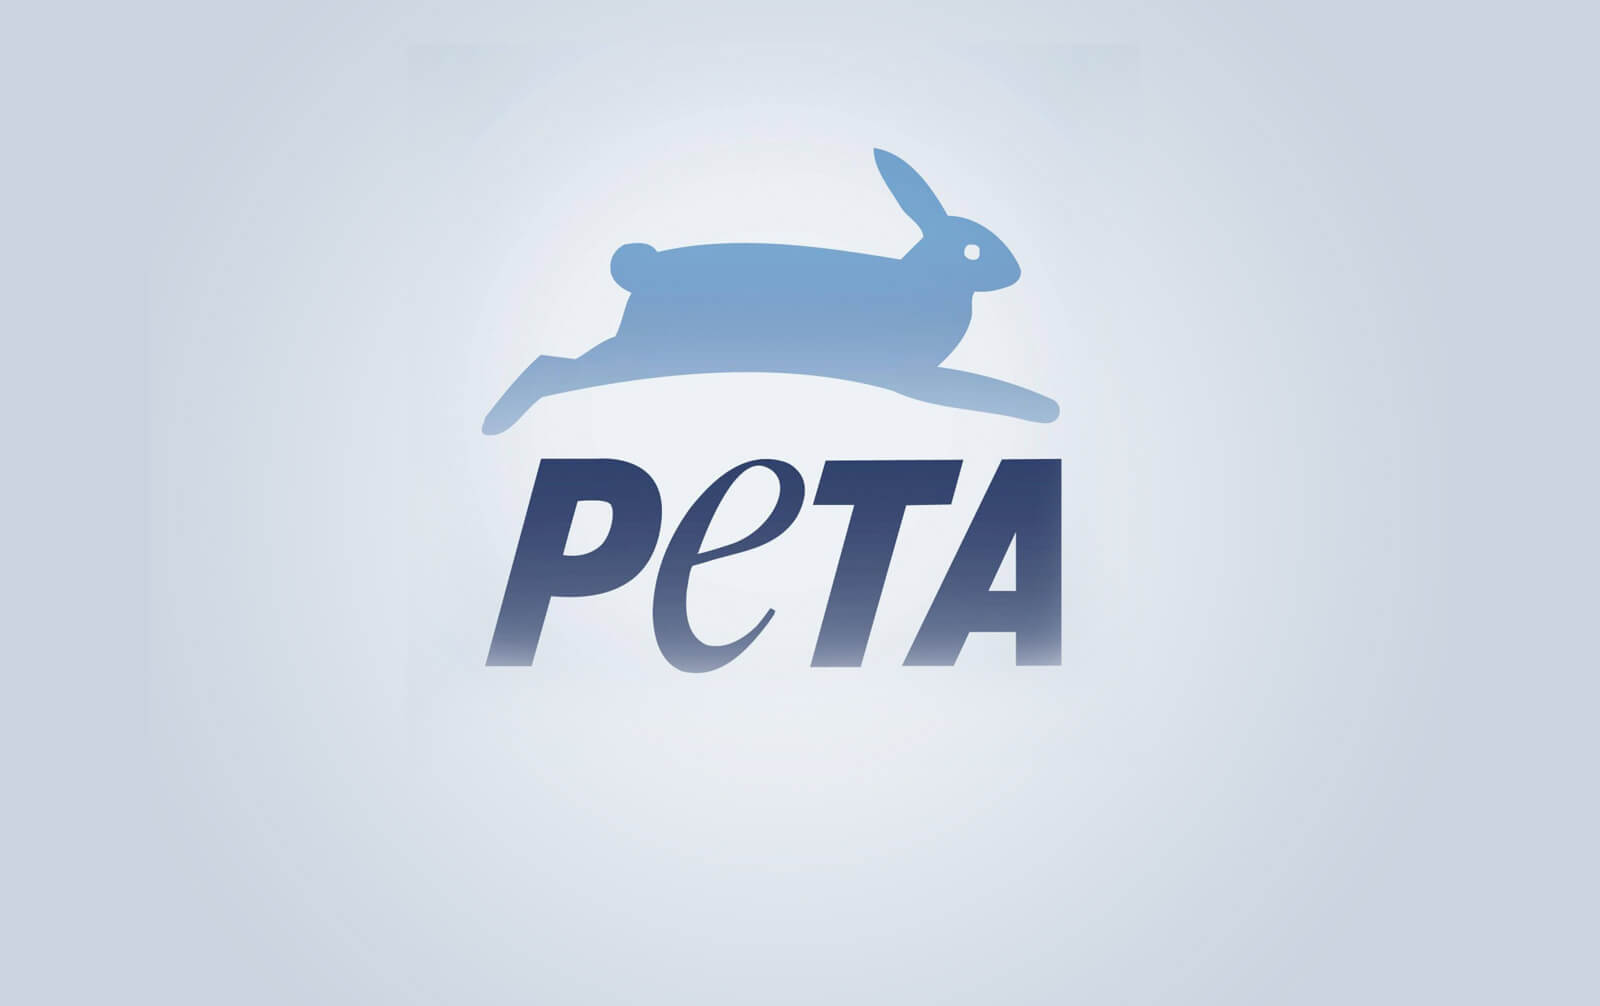 PETA’s First-Ever Augmented Reality Project Launches at JHU | PETA